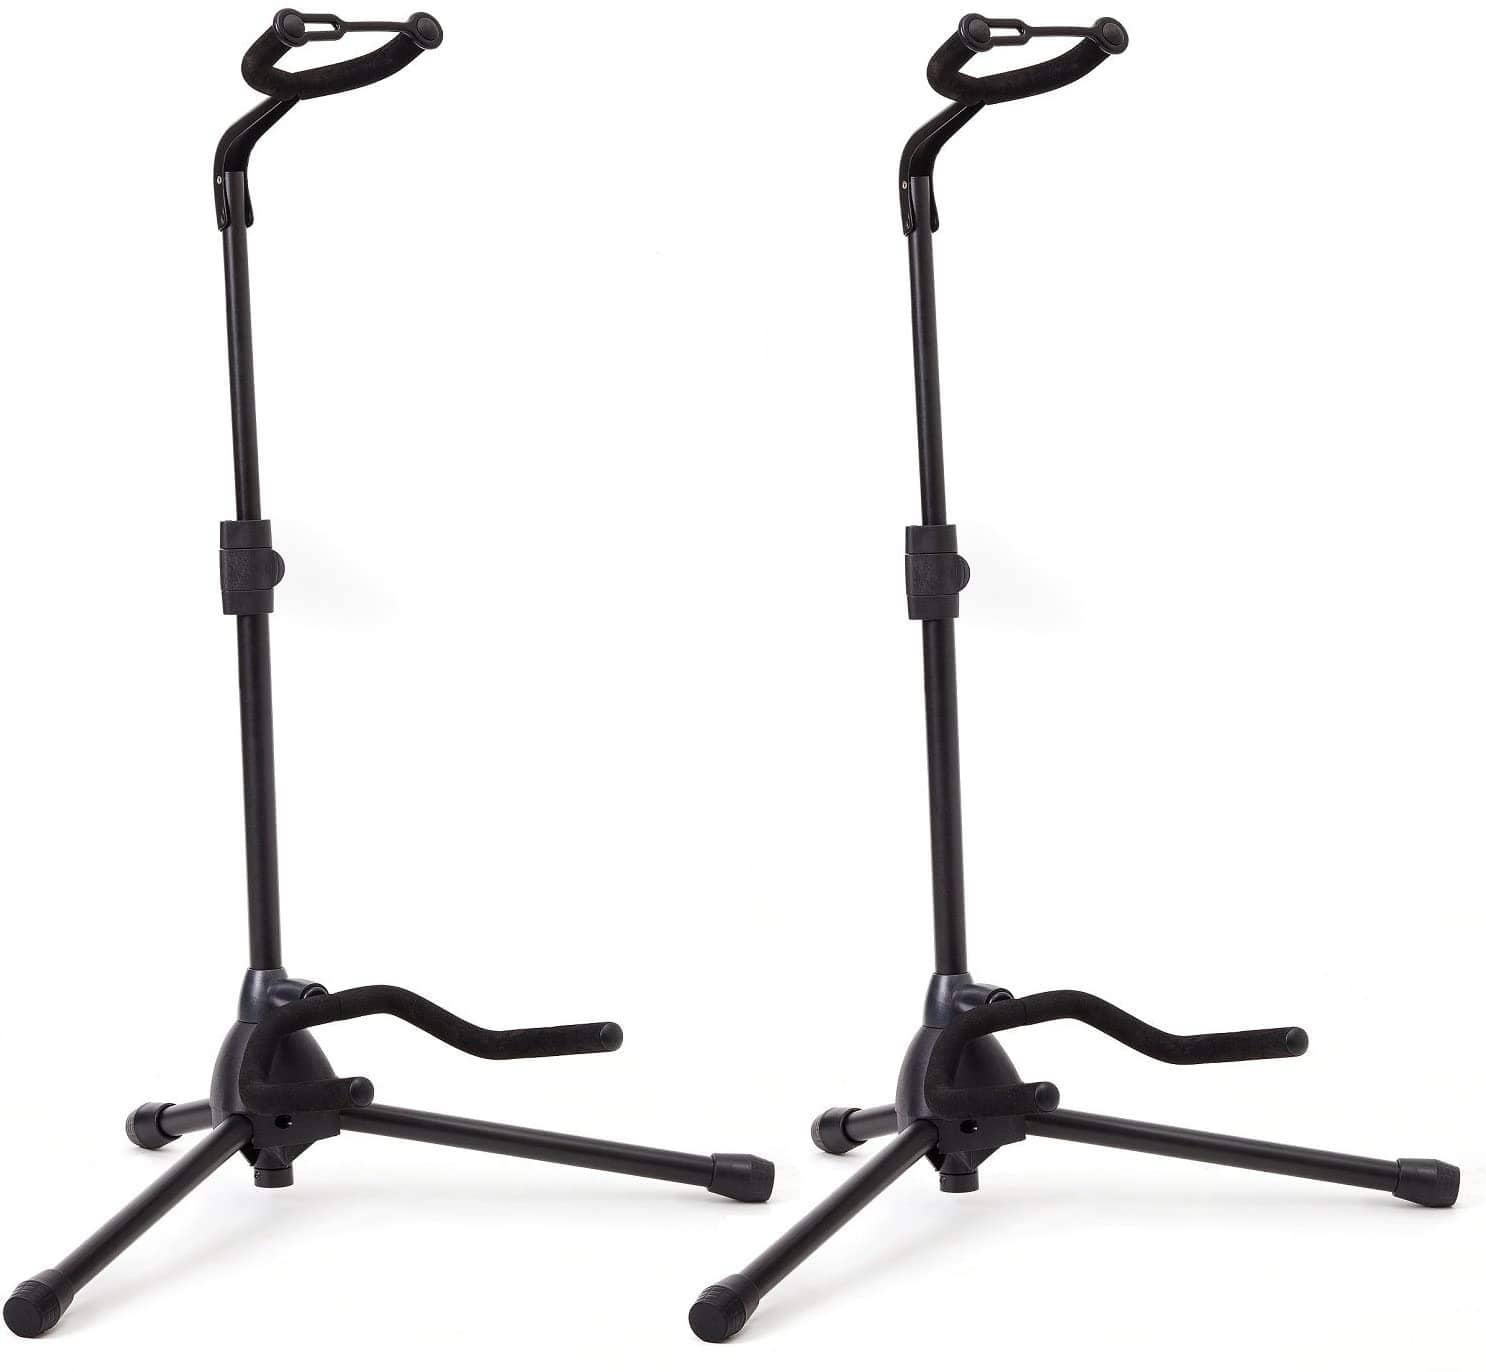 Pack of 2 – Universal Guitar Stand by Hola! Music – Fits Acoustic, Classical, Electric, Bass Guitars, Mandolins, Banjos, Ukuleles and Other Stringed Instruments 8